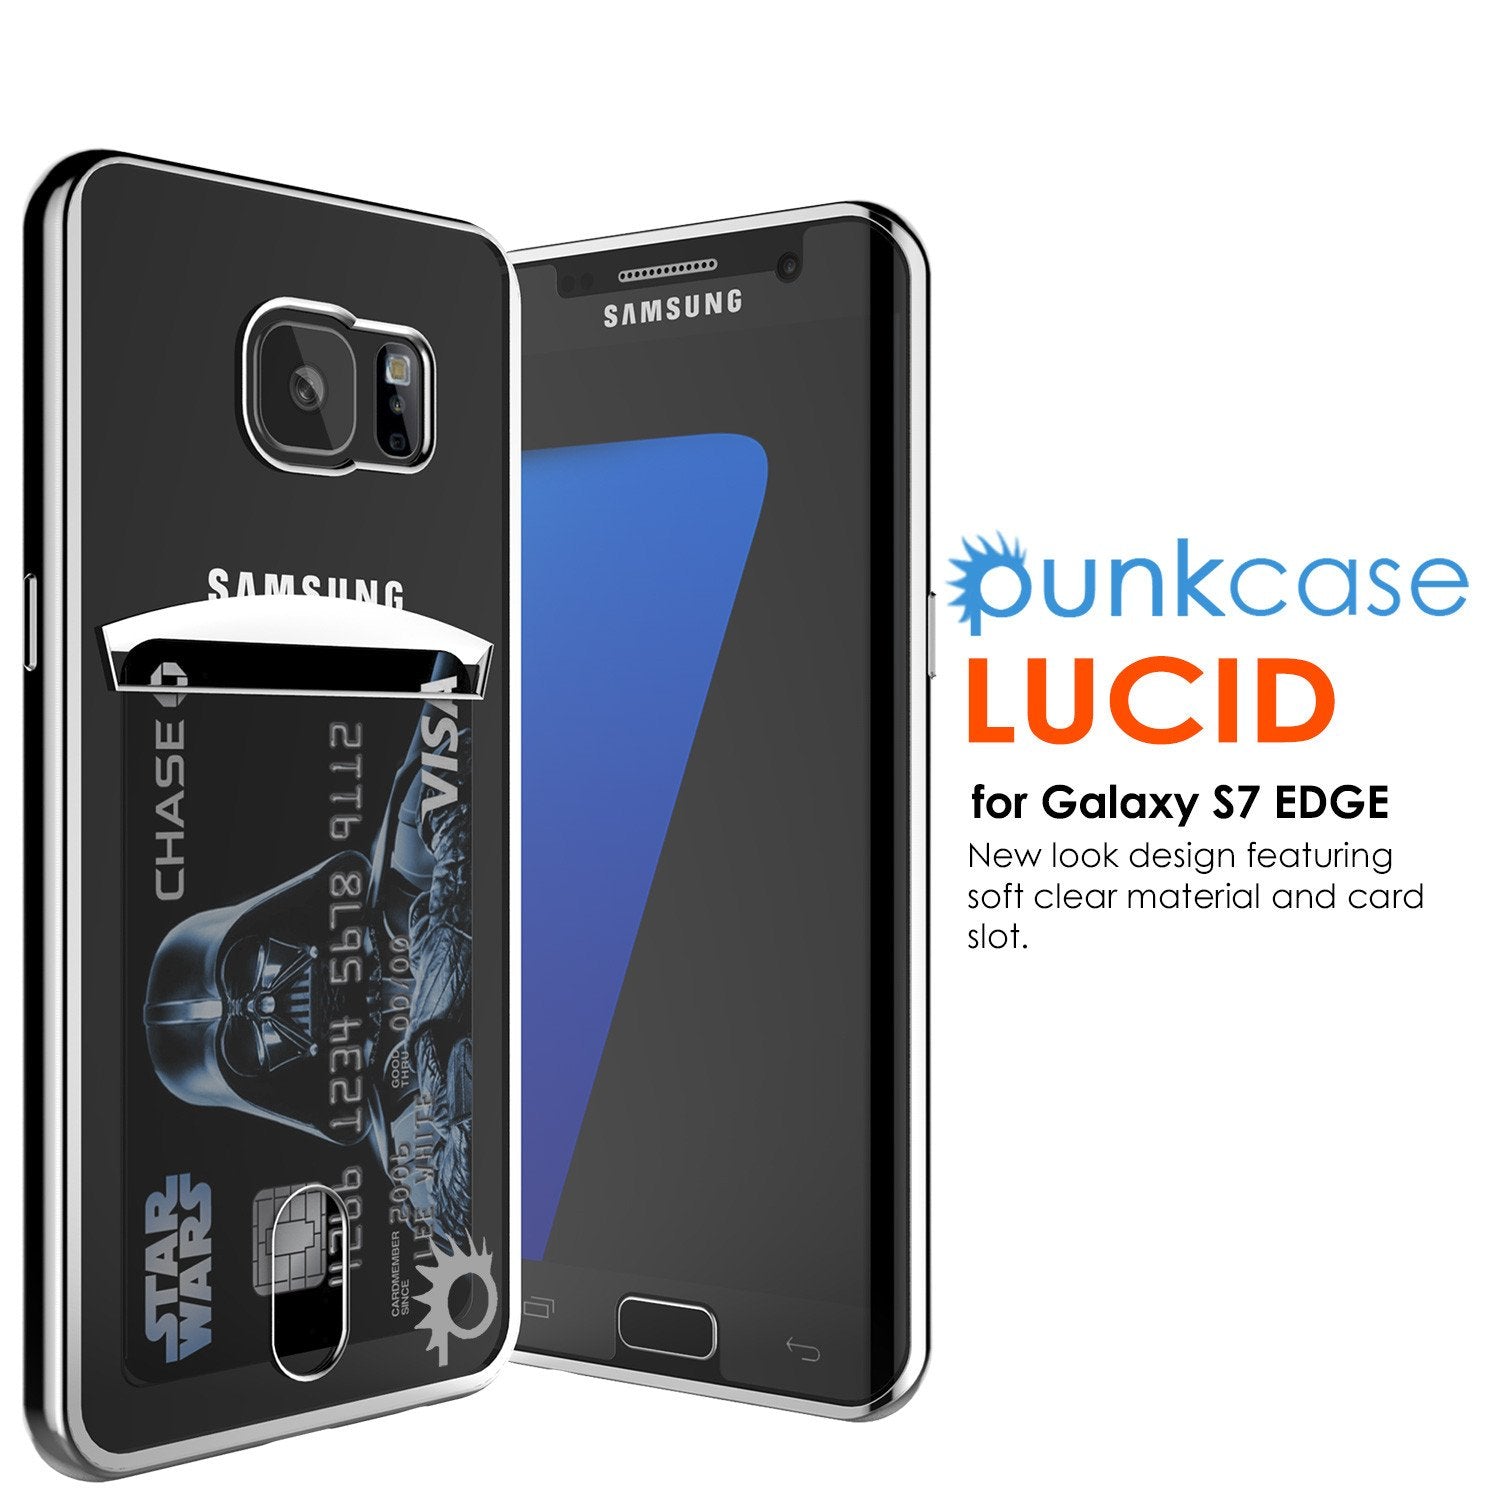 Galaxy S7 EDGE Case, PUNKCASE® LUCID Silver Series | Card Slot | SHIELD Screen Protector | Ultra fit